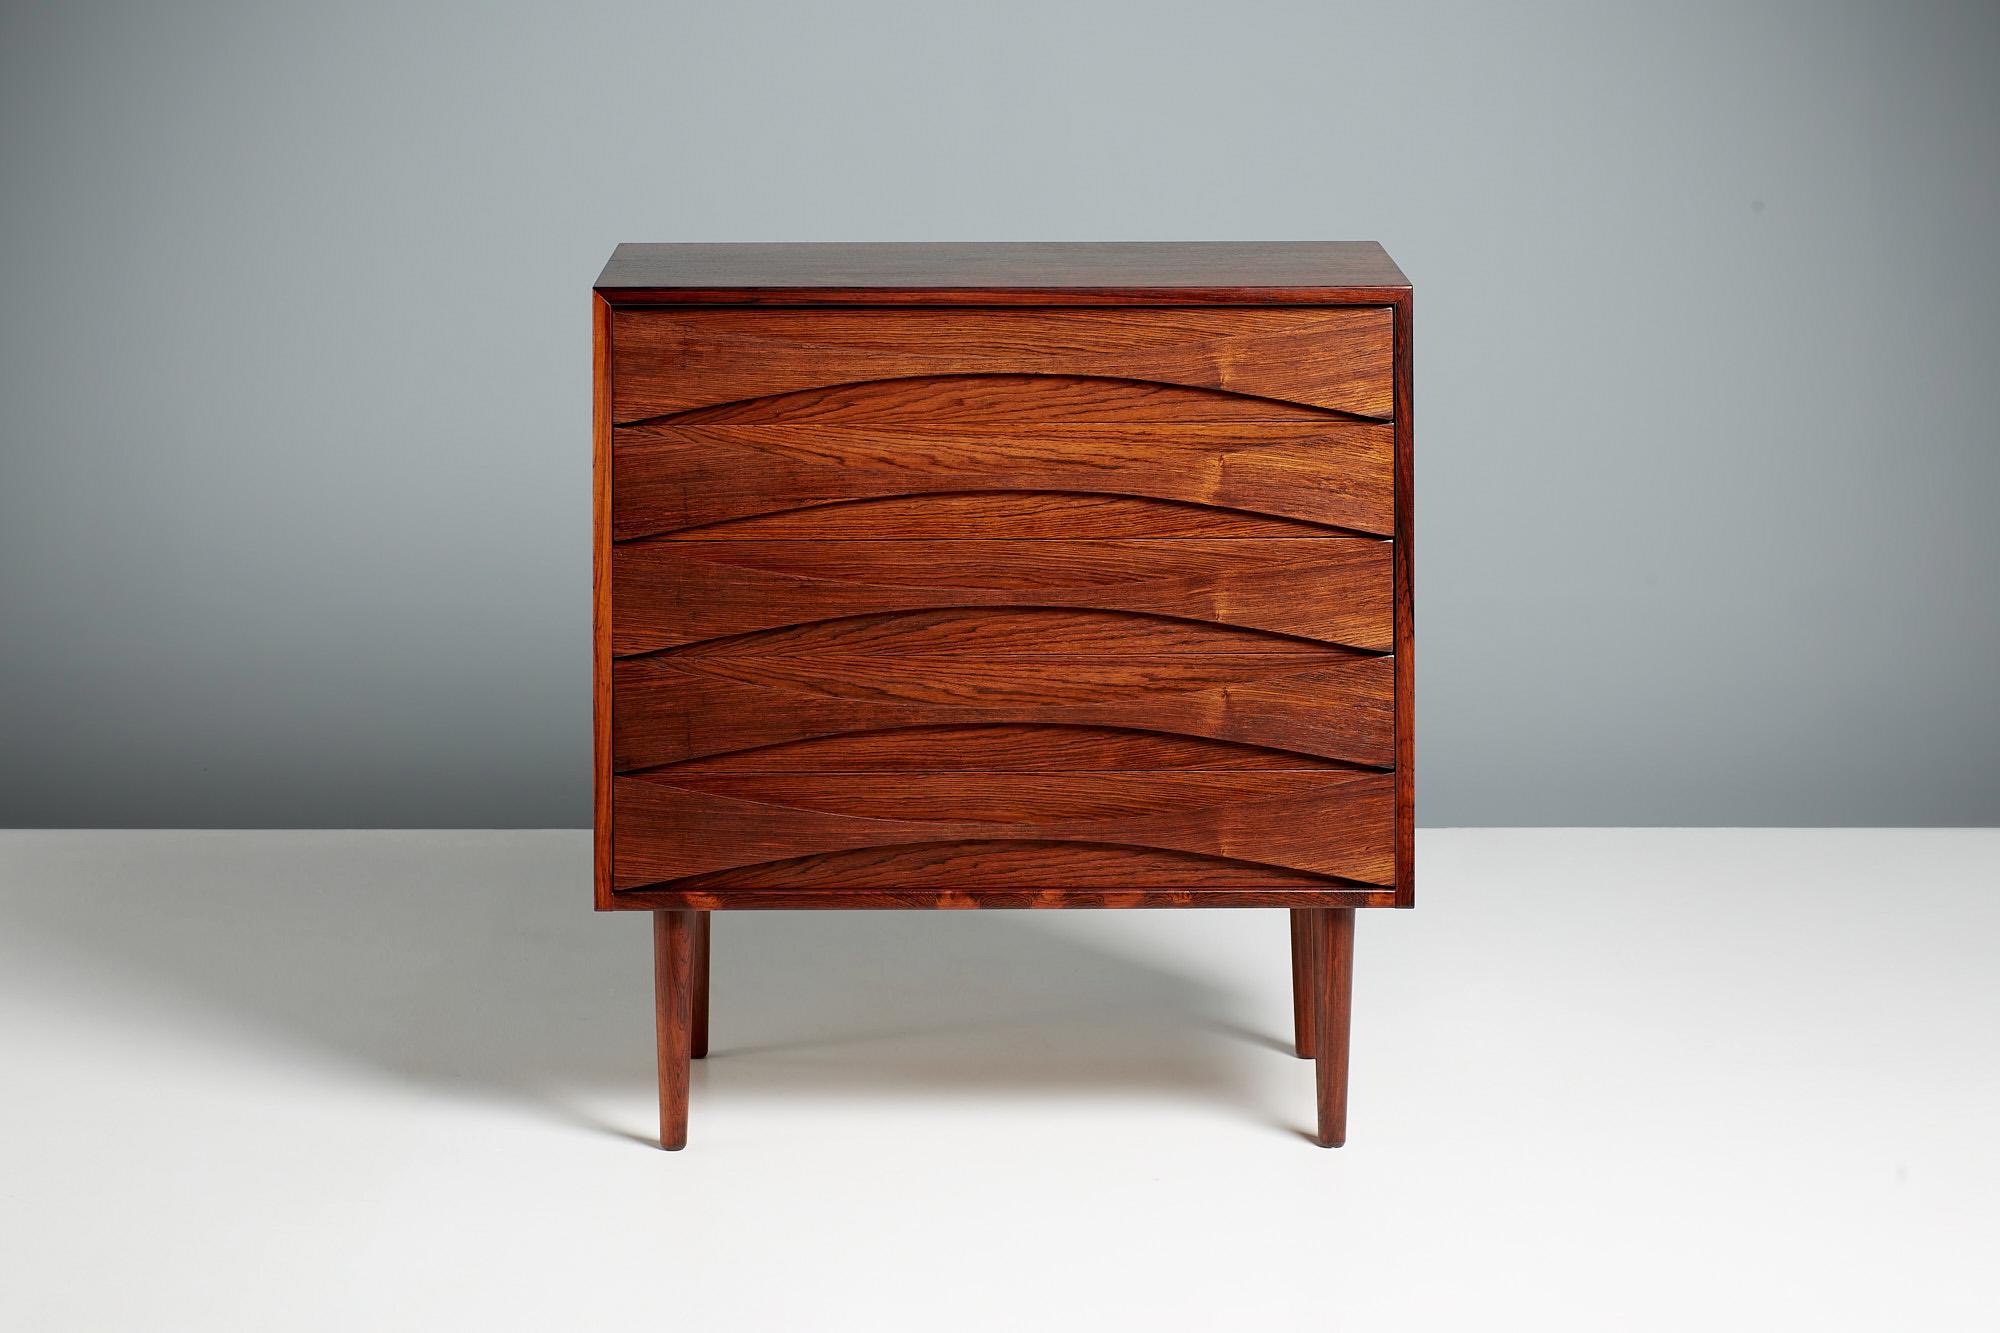 Rarely seen chest of drawers from Danish designer Niels Clausen, produced by his own company NC Mobler, c1960s. 

This chest features turned and tapered legs in solid rosewood. The chest frame is made of oak with highly figured rosewood veneer.